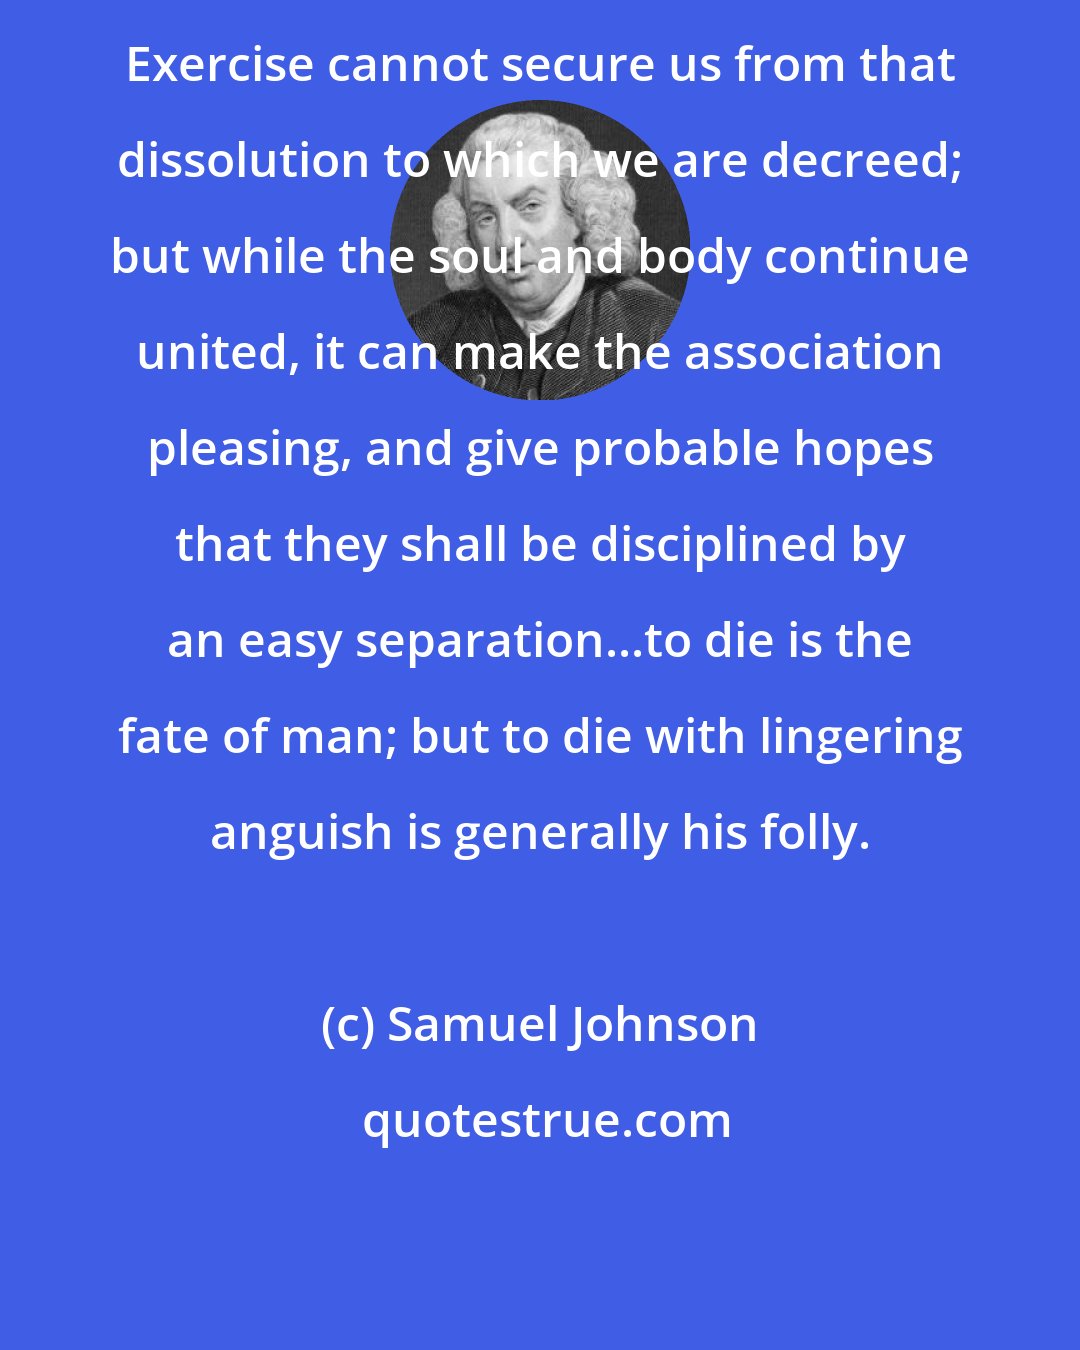 Samuel Johnson: Exercise cannot secure us from that dissolution to which we are decreed; but while the soul and body continue united, it can make the association pleasing, and give probable hopes that they shall be disciplined by an easy separation...to die is the fate of man; but to die with lingering anguish is generally his folly.